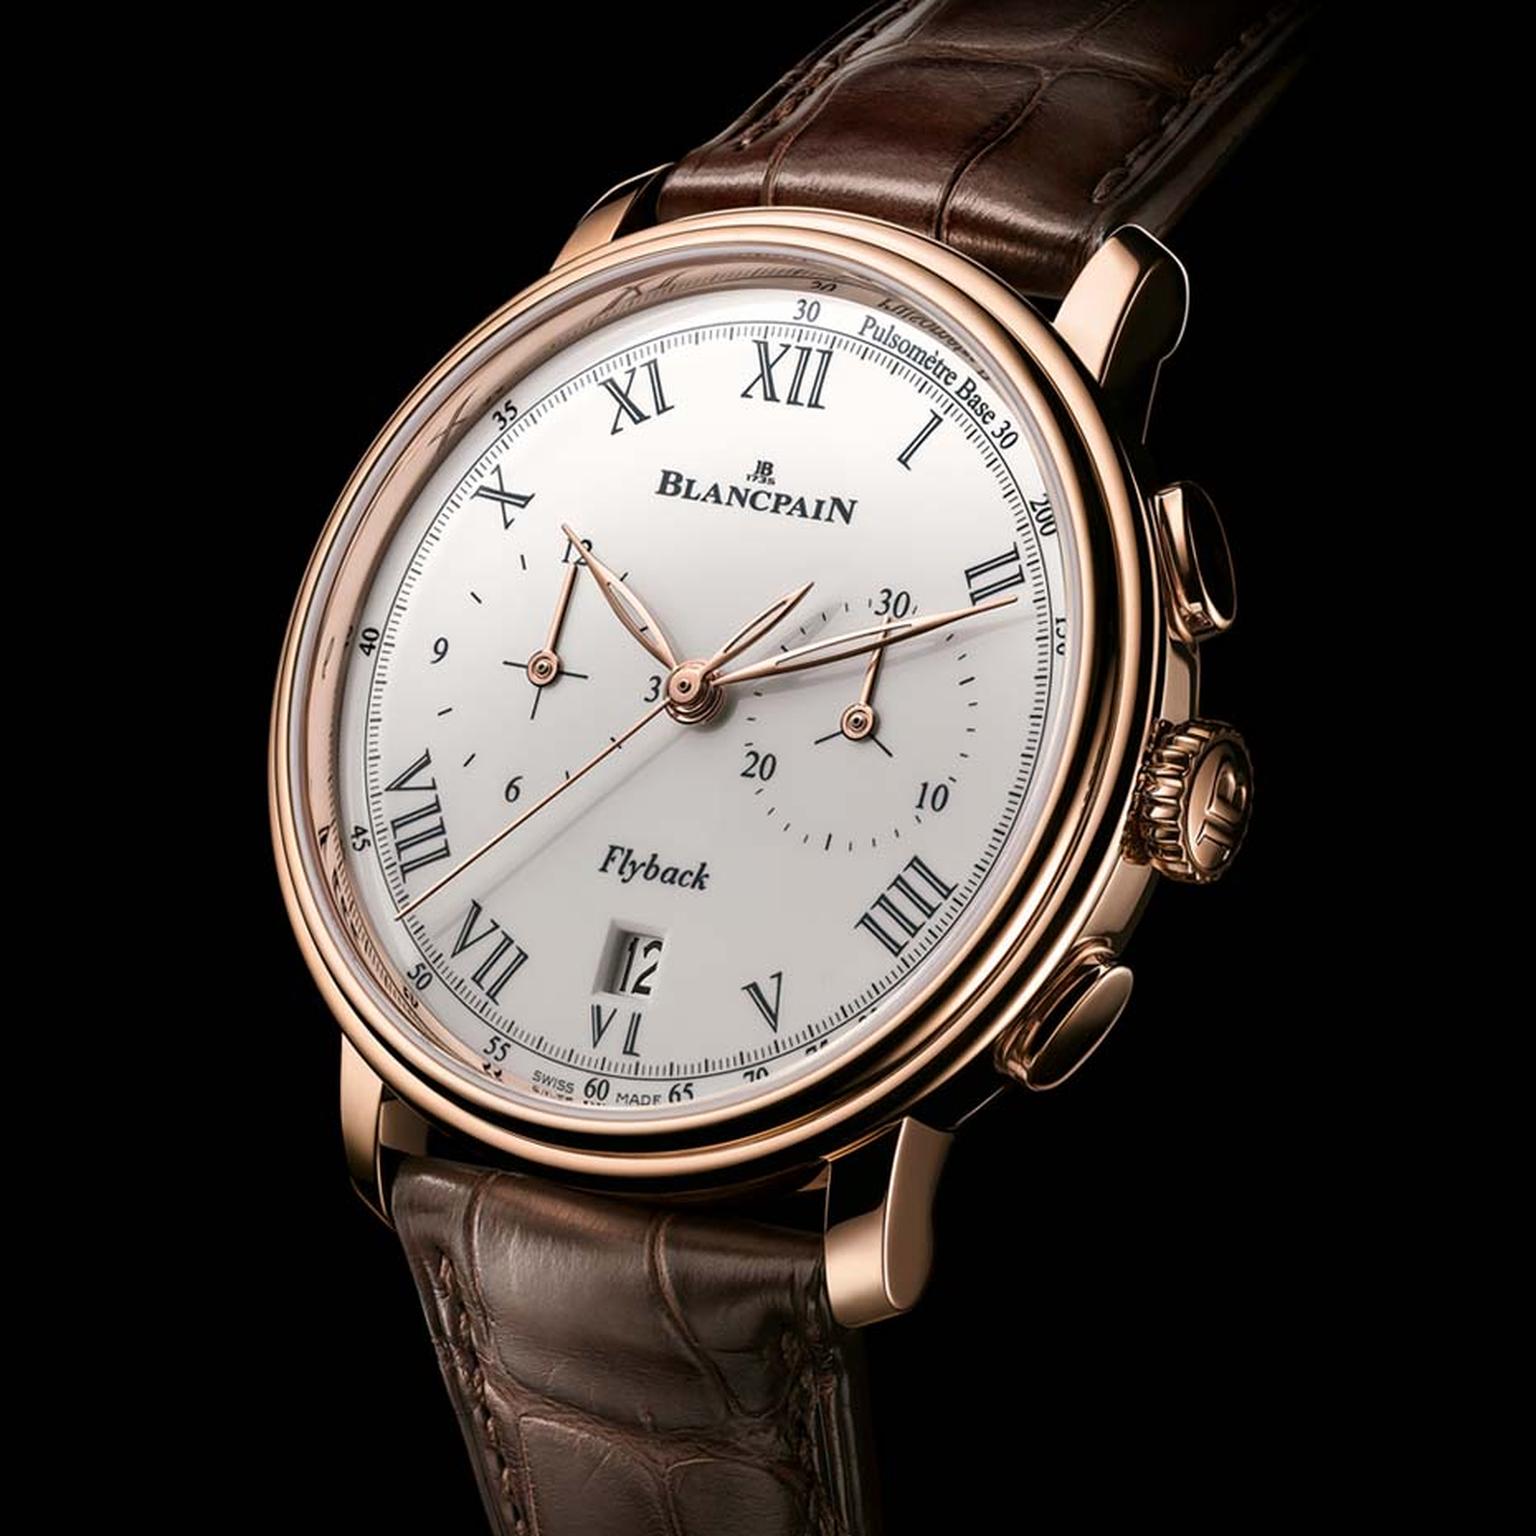 Blancpain's most classic collection, named after the village of Villeret where the brand was born, was expanded with the Chronographe Pulsomètre watch in a 43.6mm rose gold case with a flyback chronograph function.